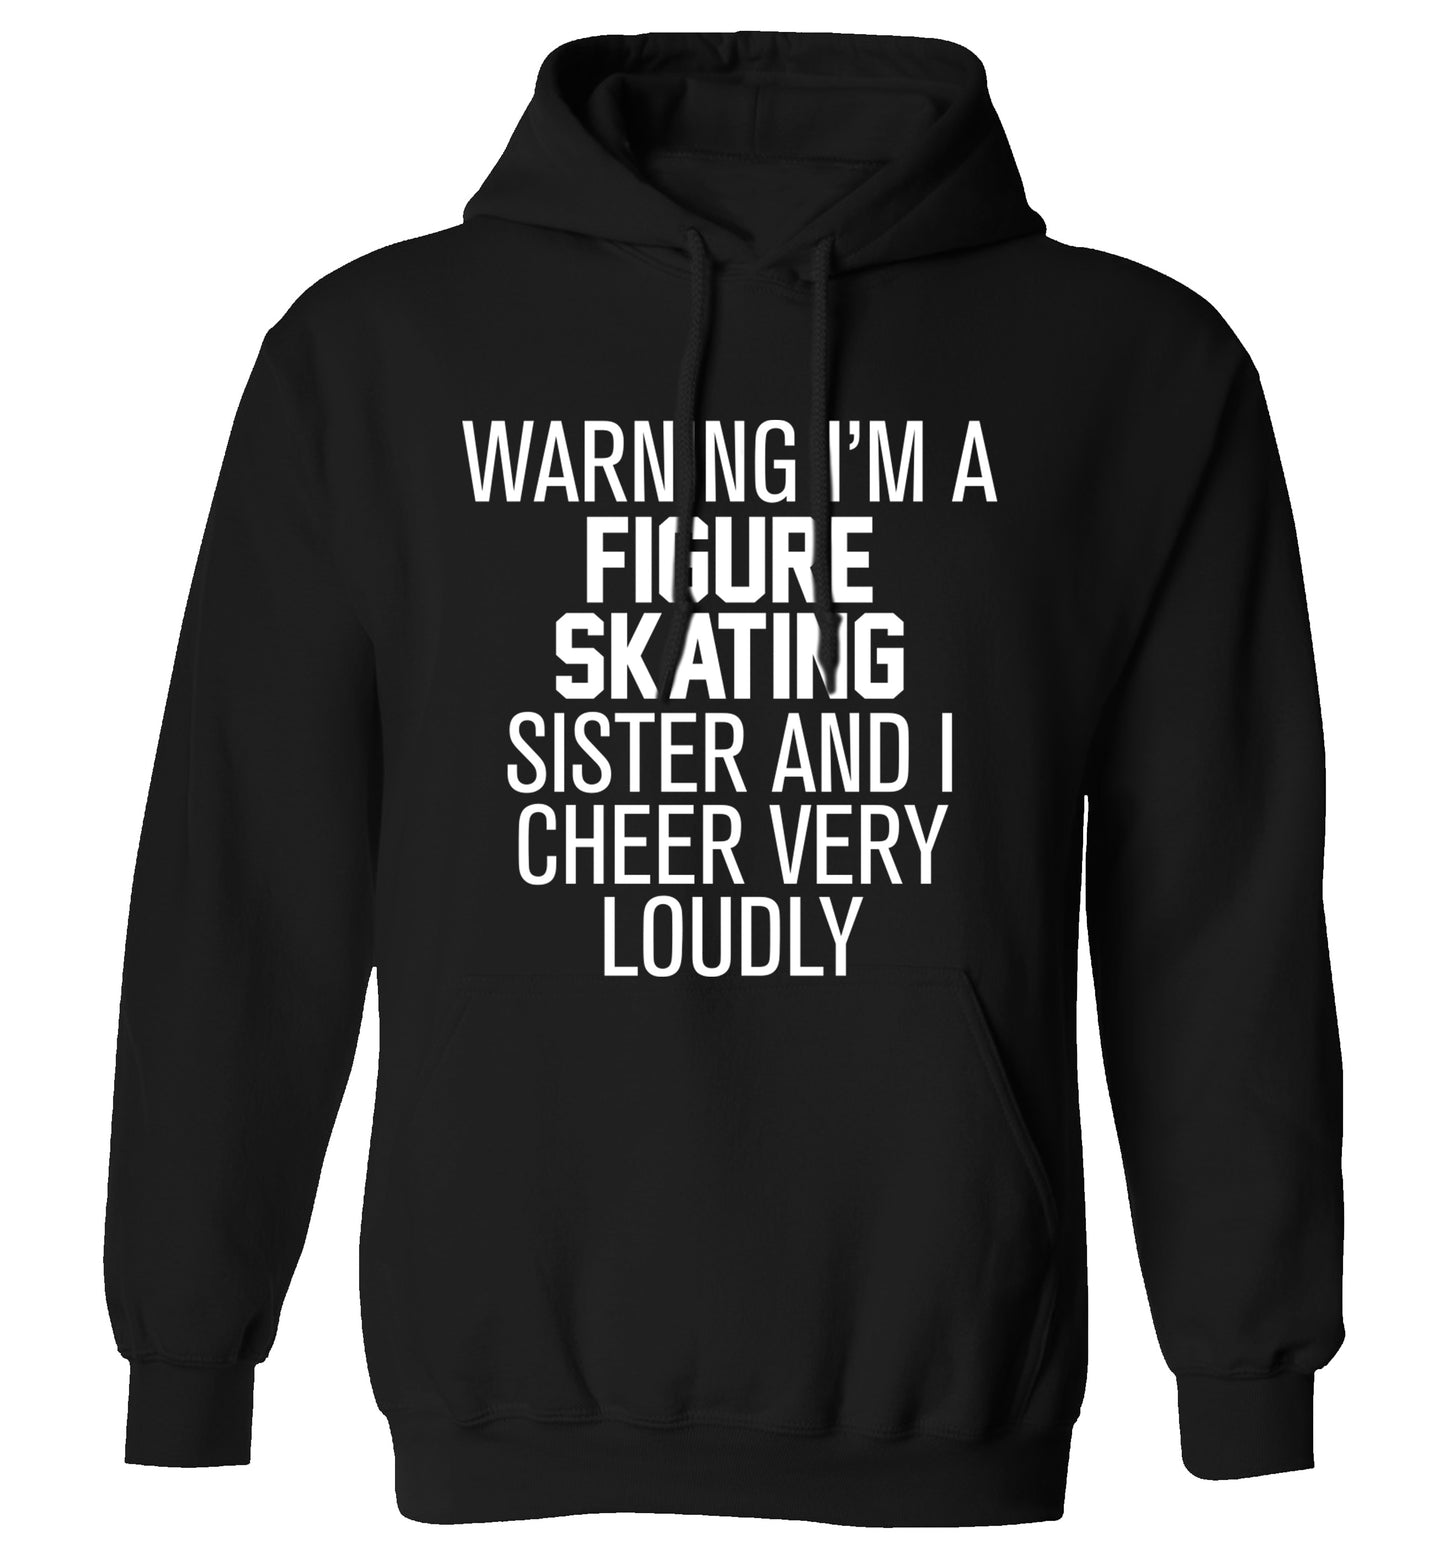 Warning I'm a figure skating sister and I cheer very loudly adults unisexblack hoodie 2XL